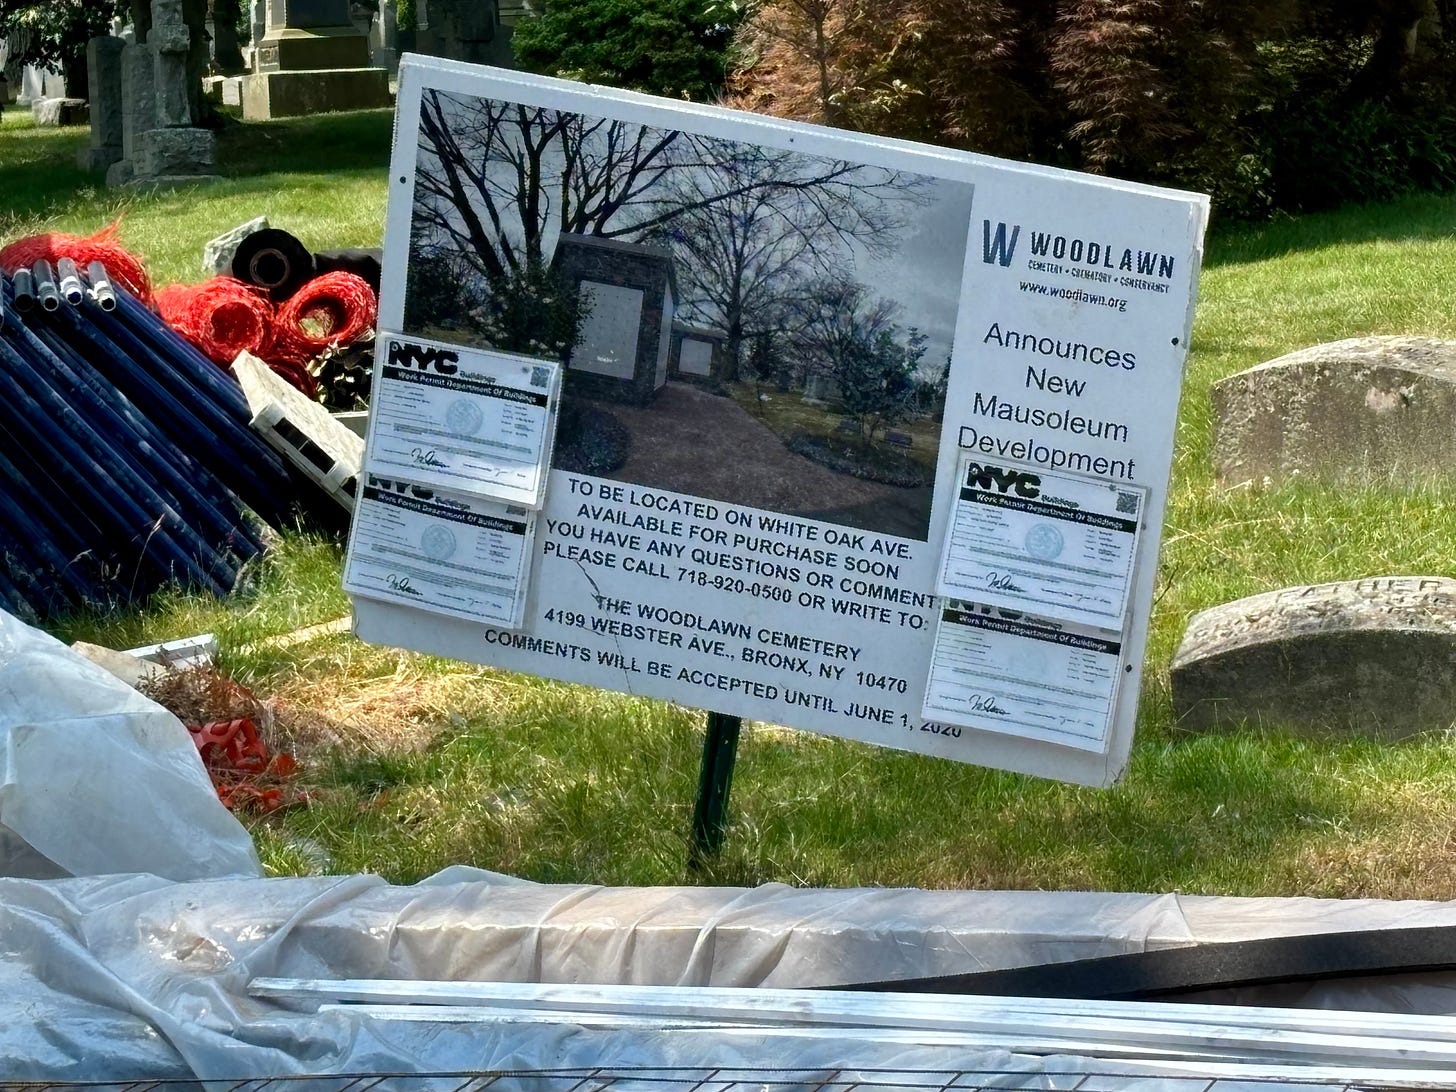 A sign posted amid construction equipment. It reads "Woodlawn Announces New Mausoleum Development." There are work permit forms from the DOB attached.